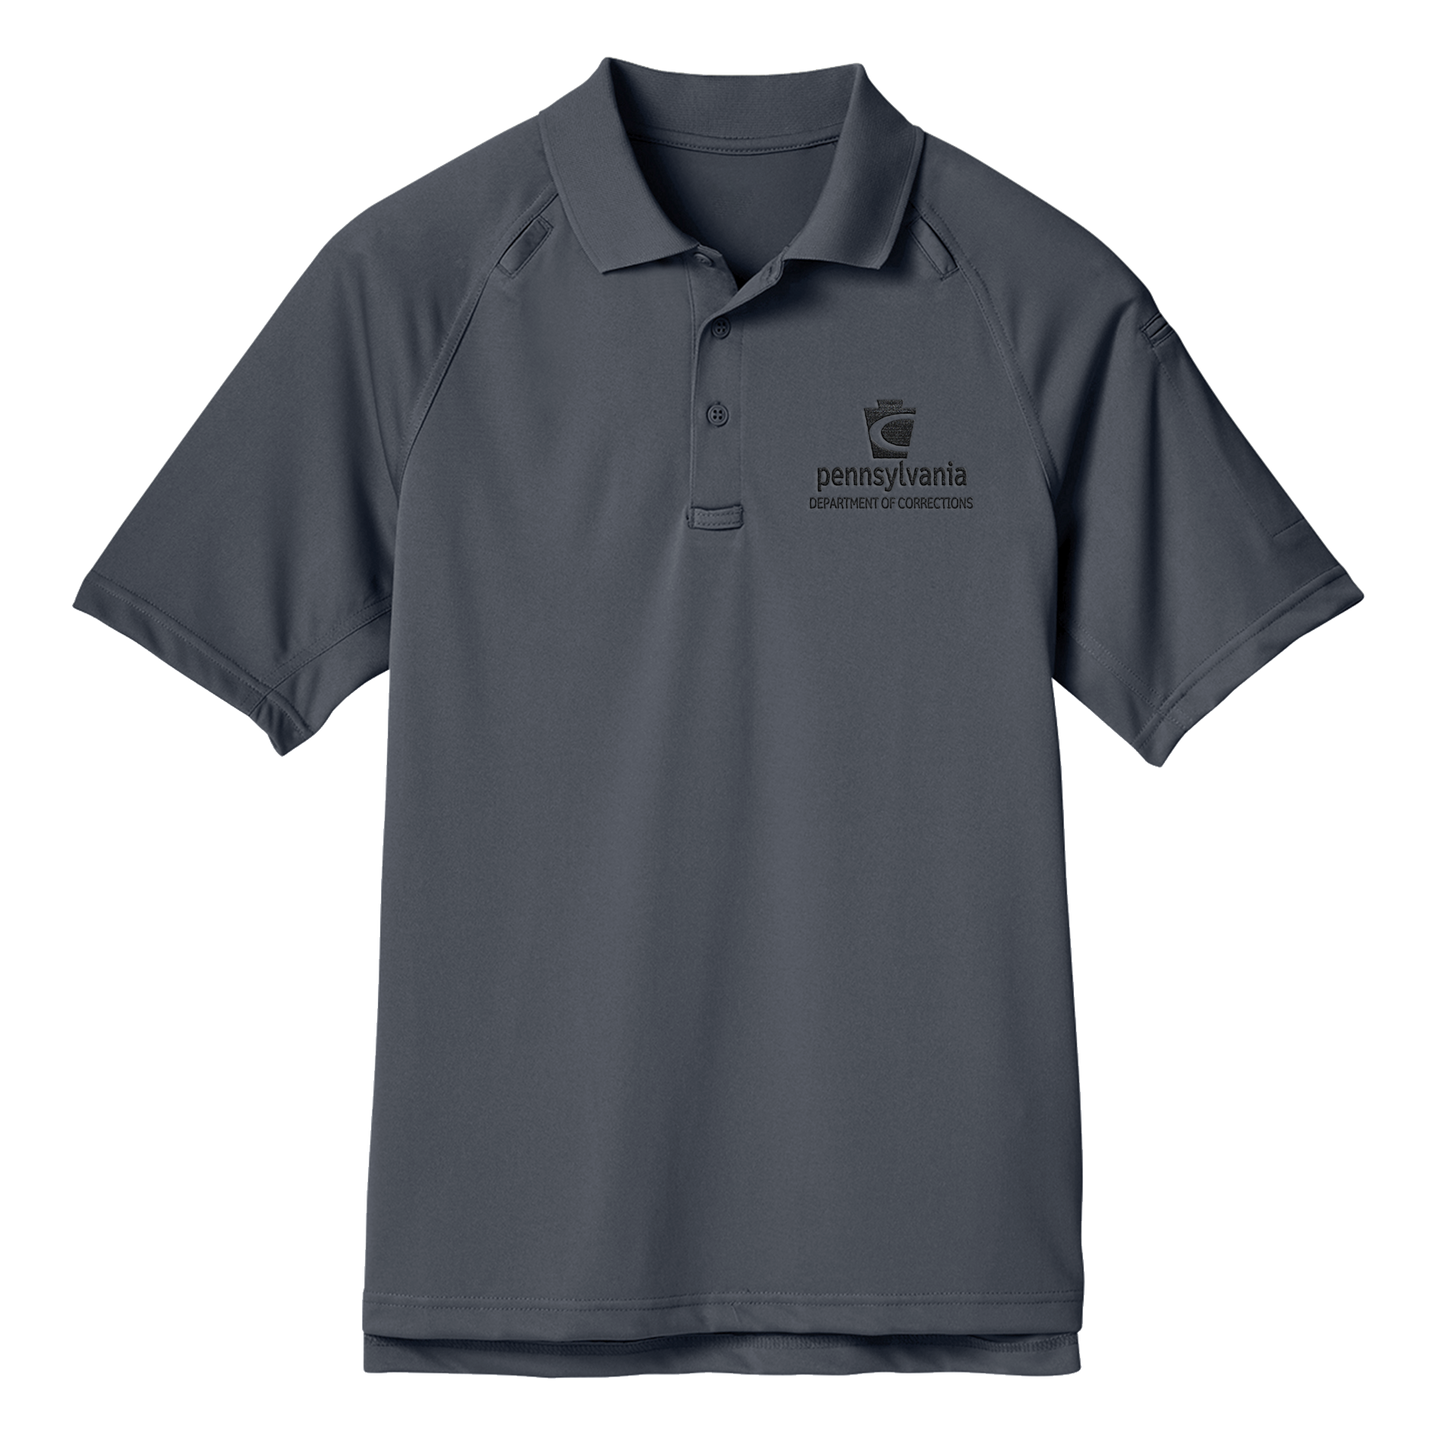 Adult Tactical Short-Sleeve Polo with Embroidered Department of Corrections Logos (Various Colors)